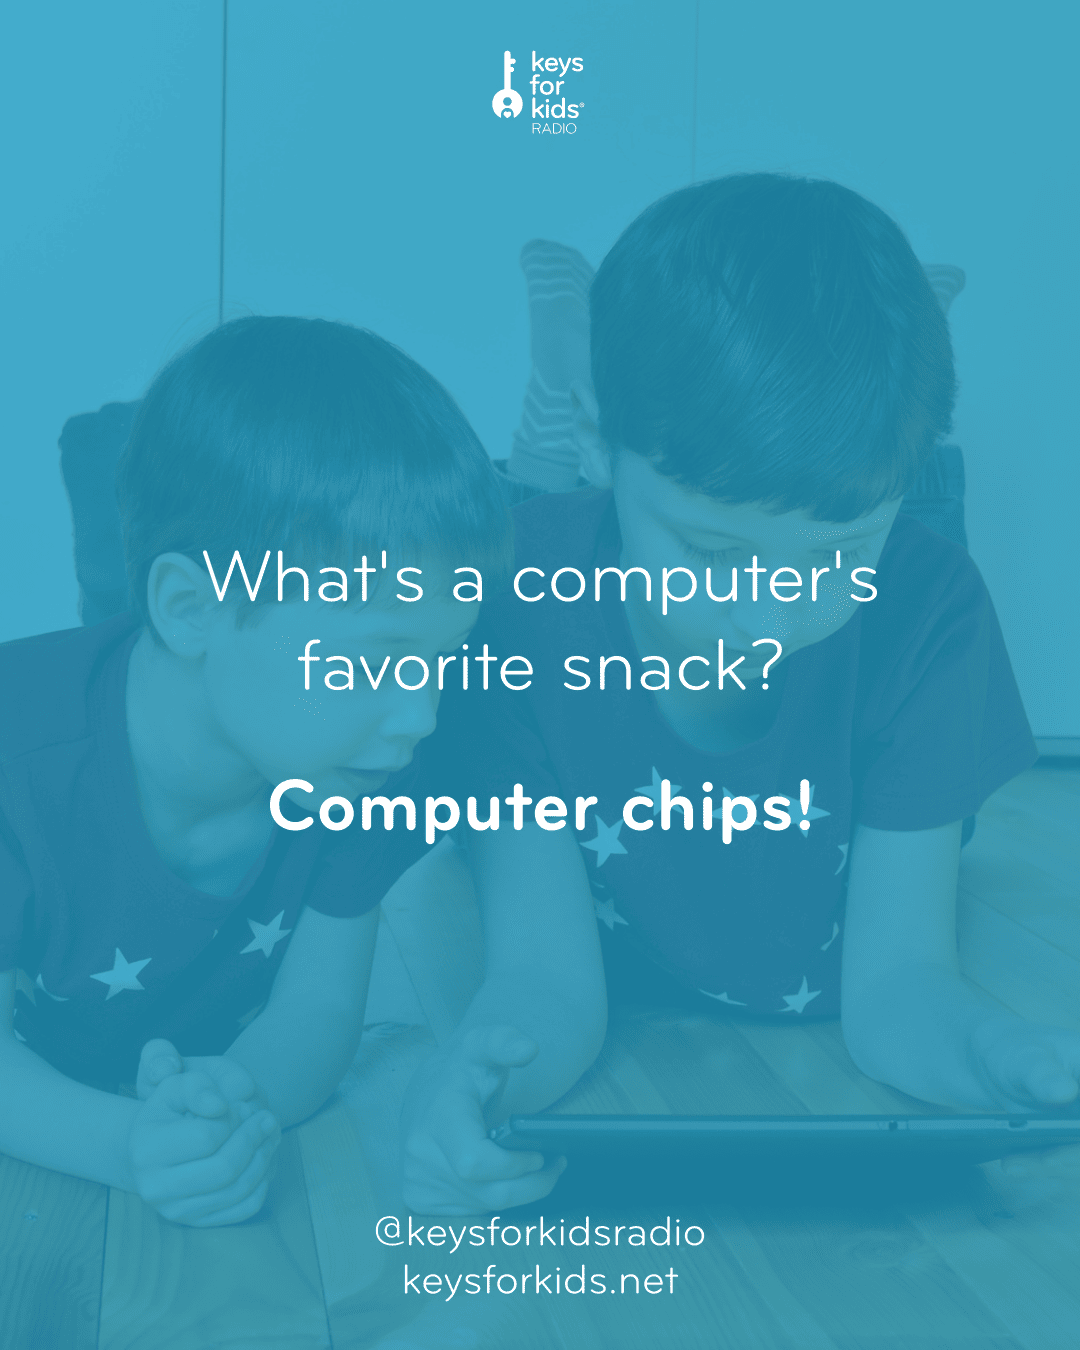 What is a computer’s favorite snack? Computer chips.